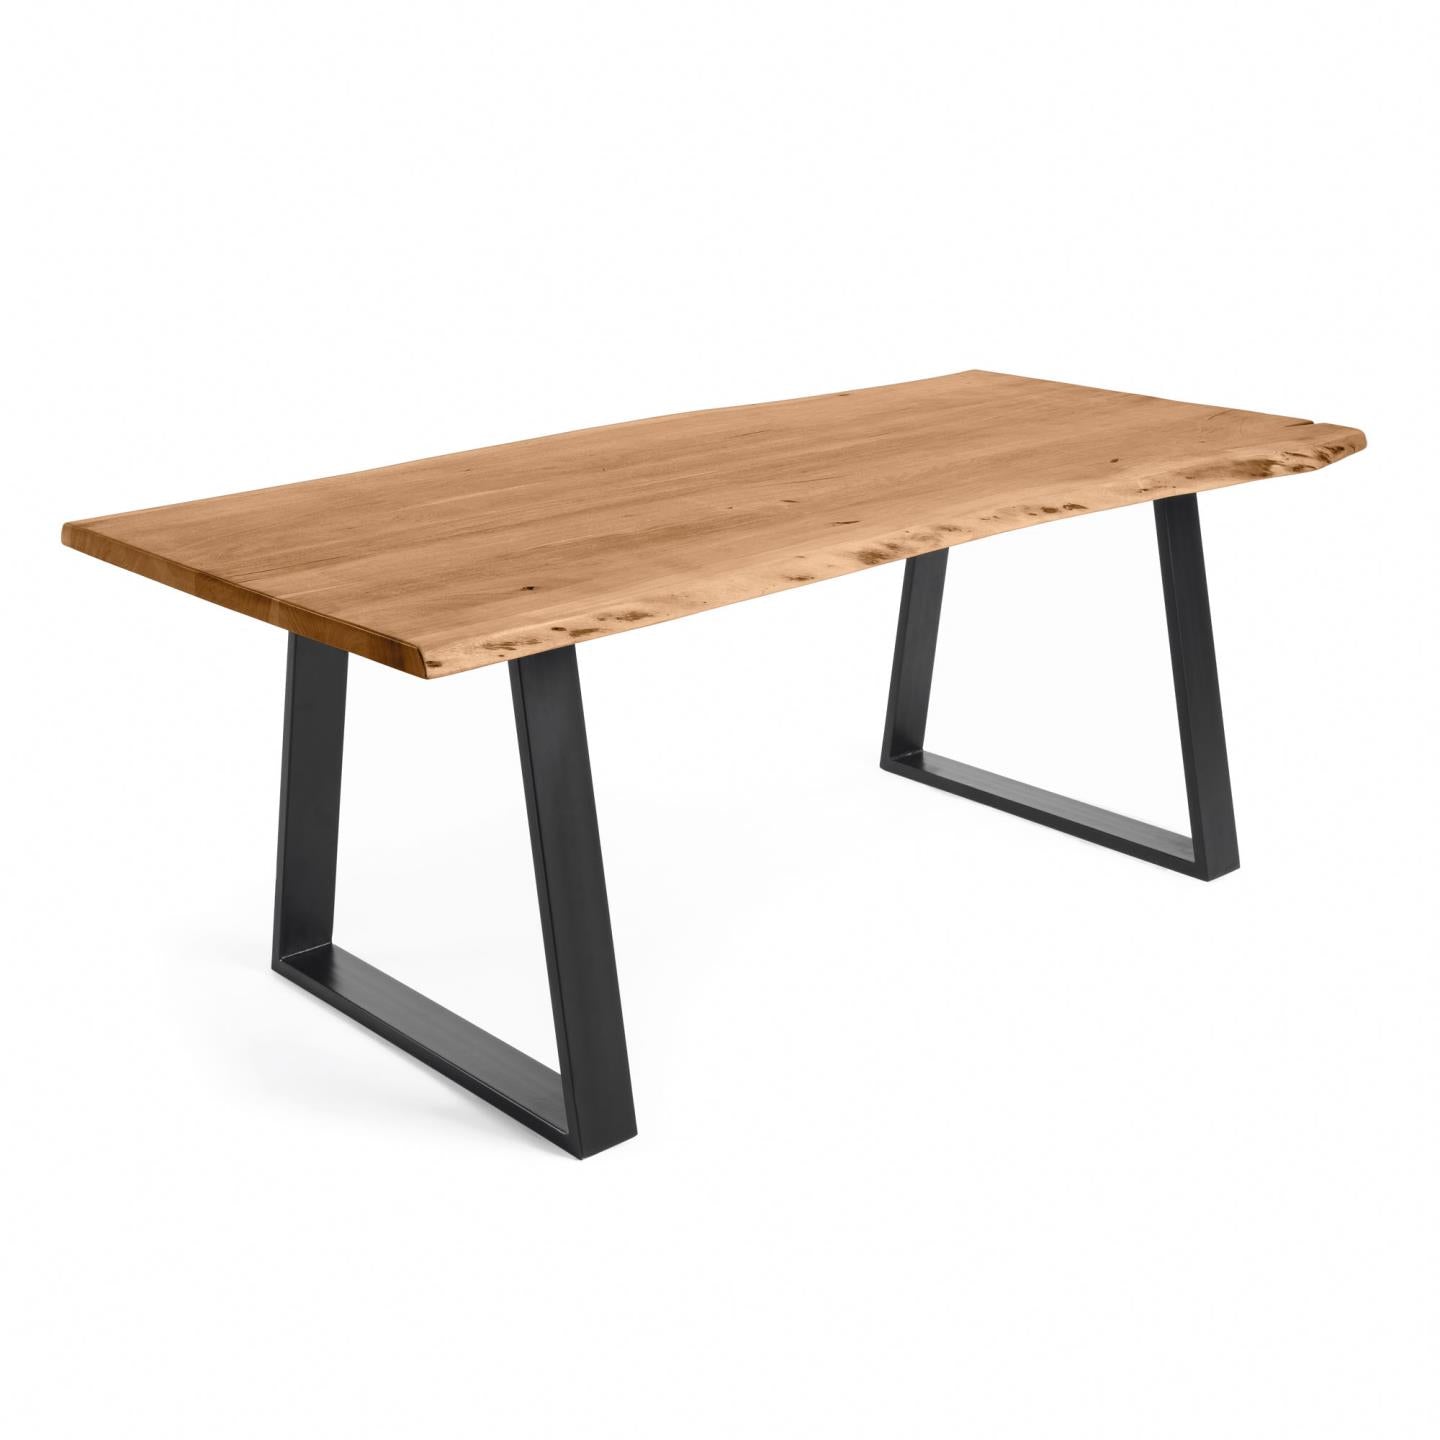 Alaia table in solid acacia wood with natural finish, 200 x 95 cm